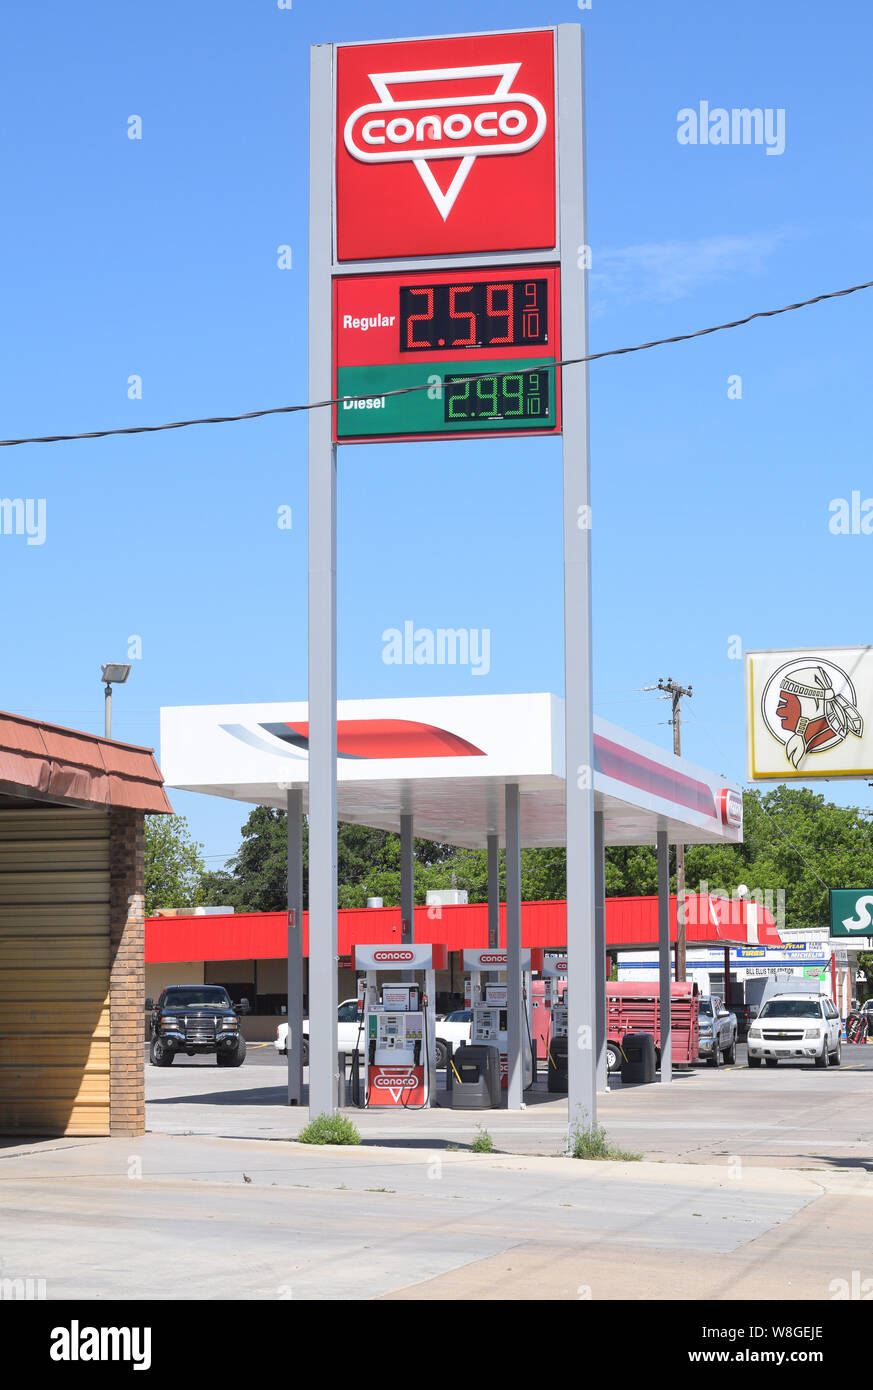 Gas prices on a Conoco Gas Station sign in the small town of Comanche Texas Stock Photo